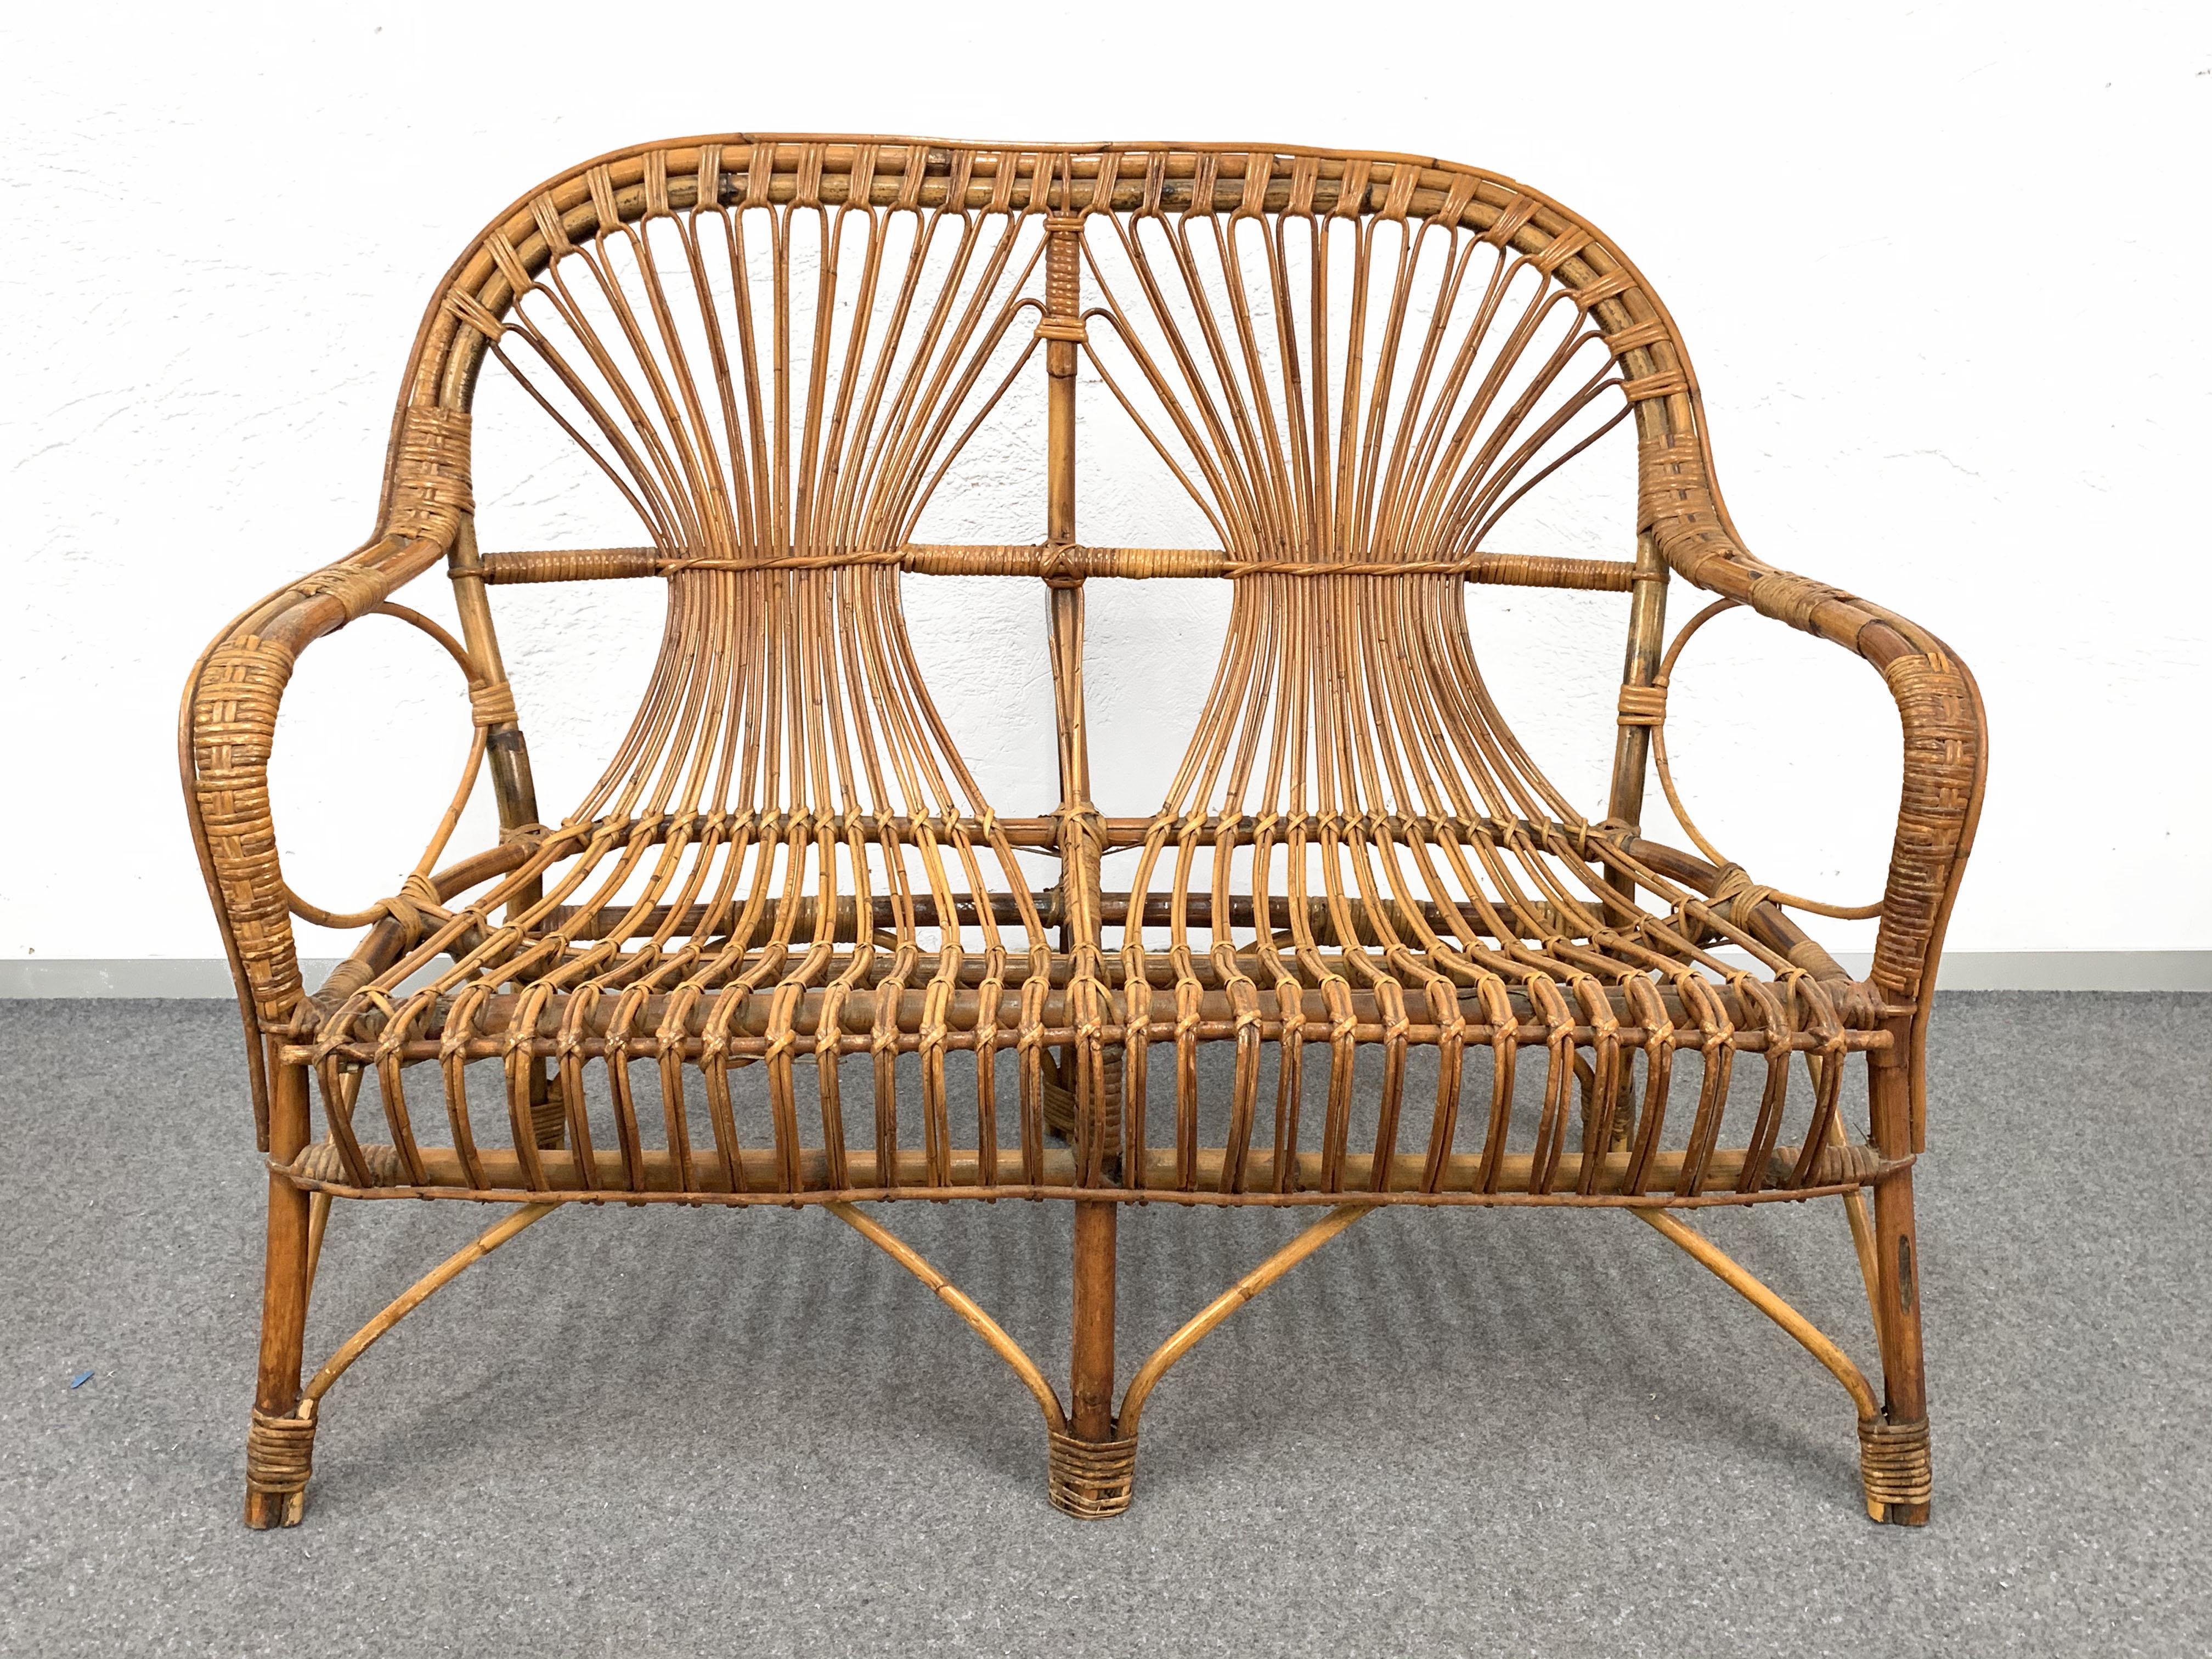 Midcentury Rattan and Bamboo Sofa, Armchairs and Italian Coffee Table, 1960s For Sale 2